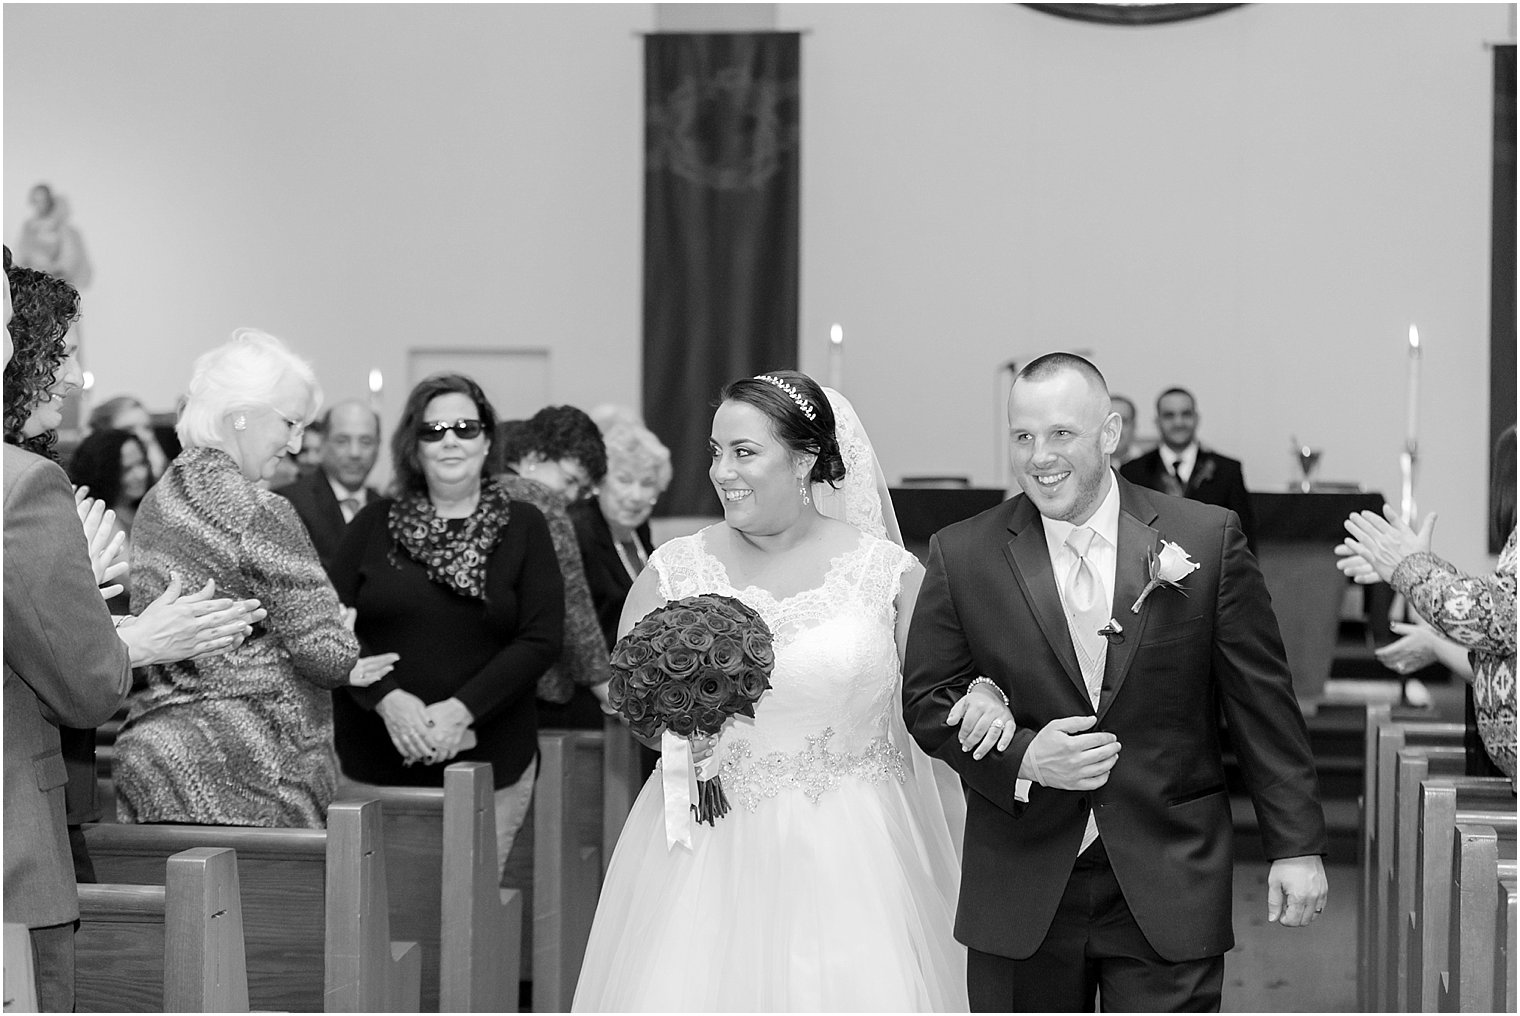 Wedding Ceremony at St. Christopher's Church, Parisippany